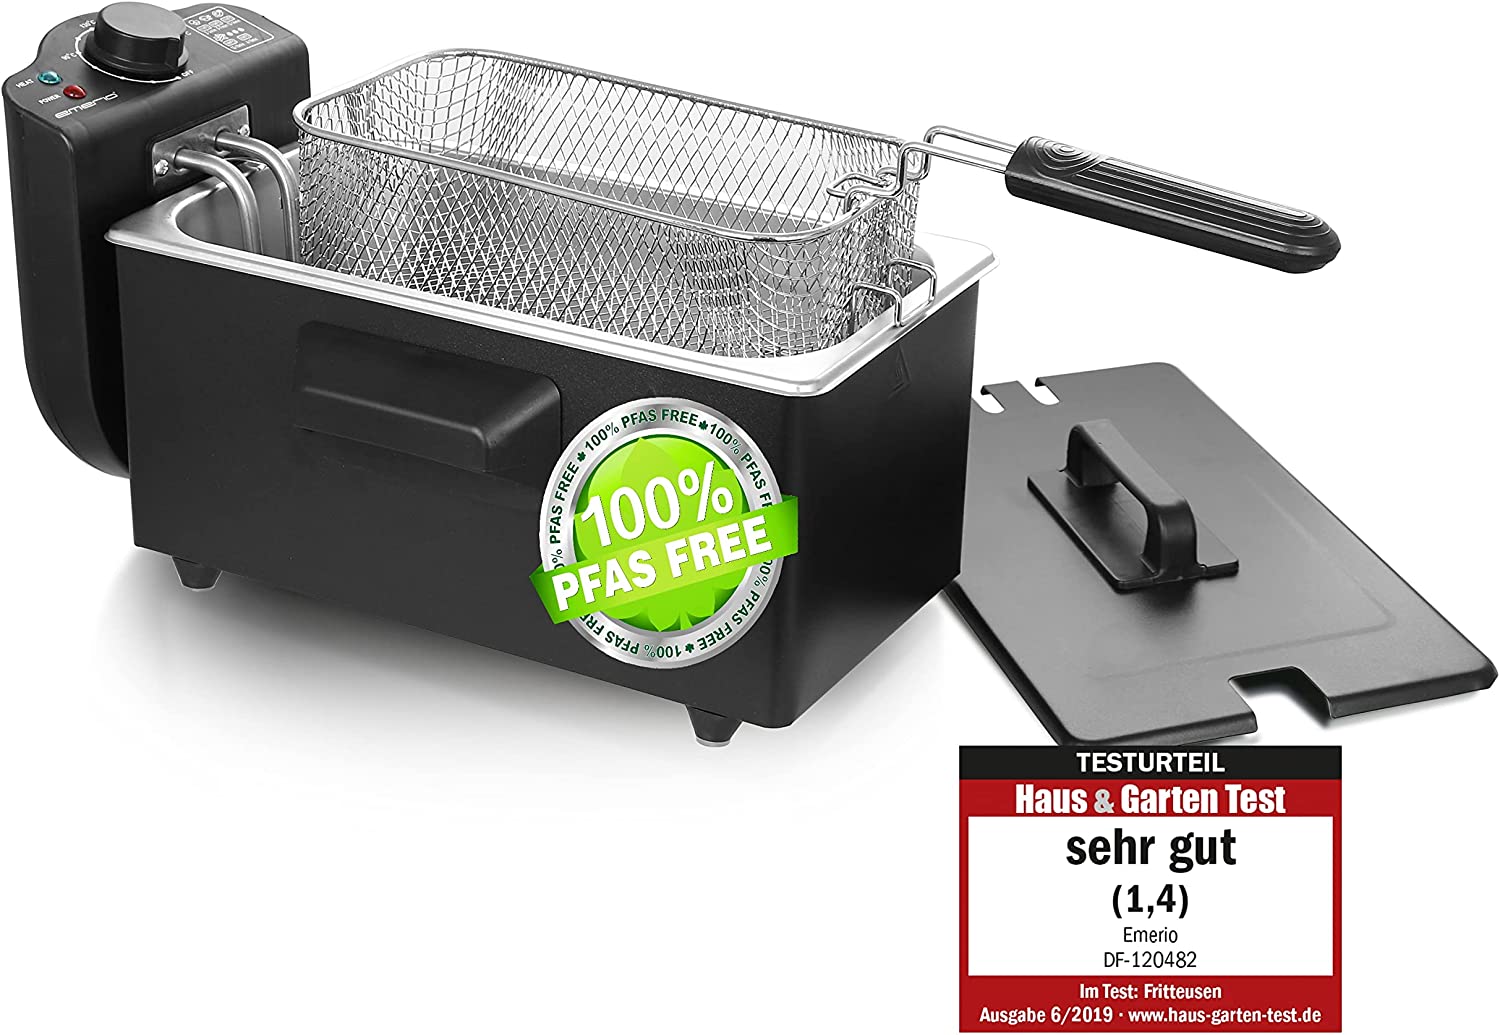 Emerio 3.0 L oil fryer with cold zone technology, \"very good 1.4\" tested by Haus & Garten 06/2019, no more bitter taste, cold zone fryer with 2000 W, stainless steel tank, BPA-free